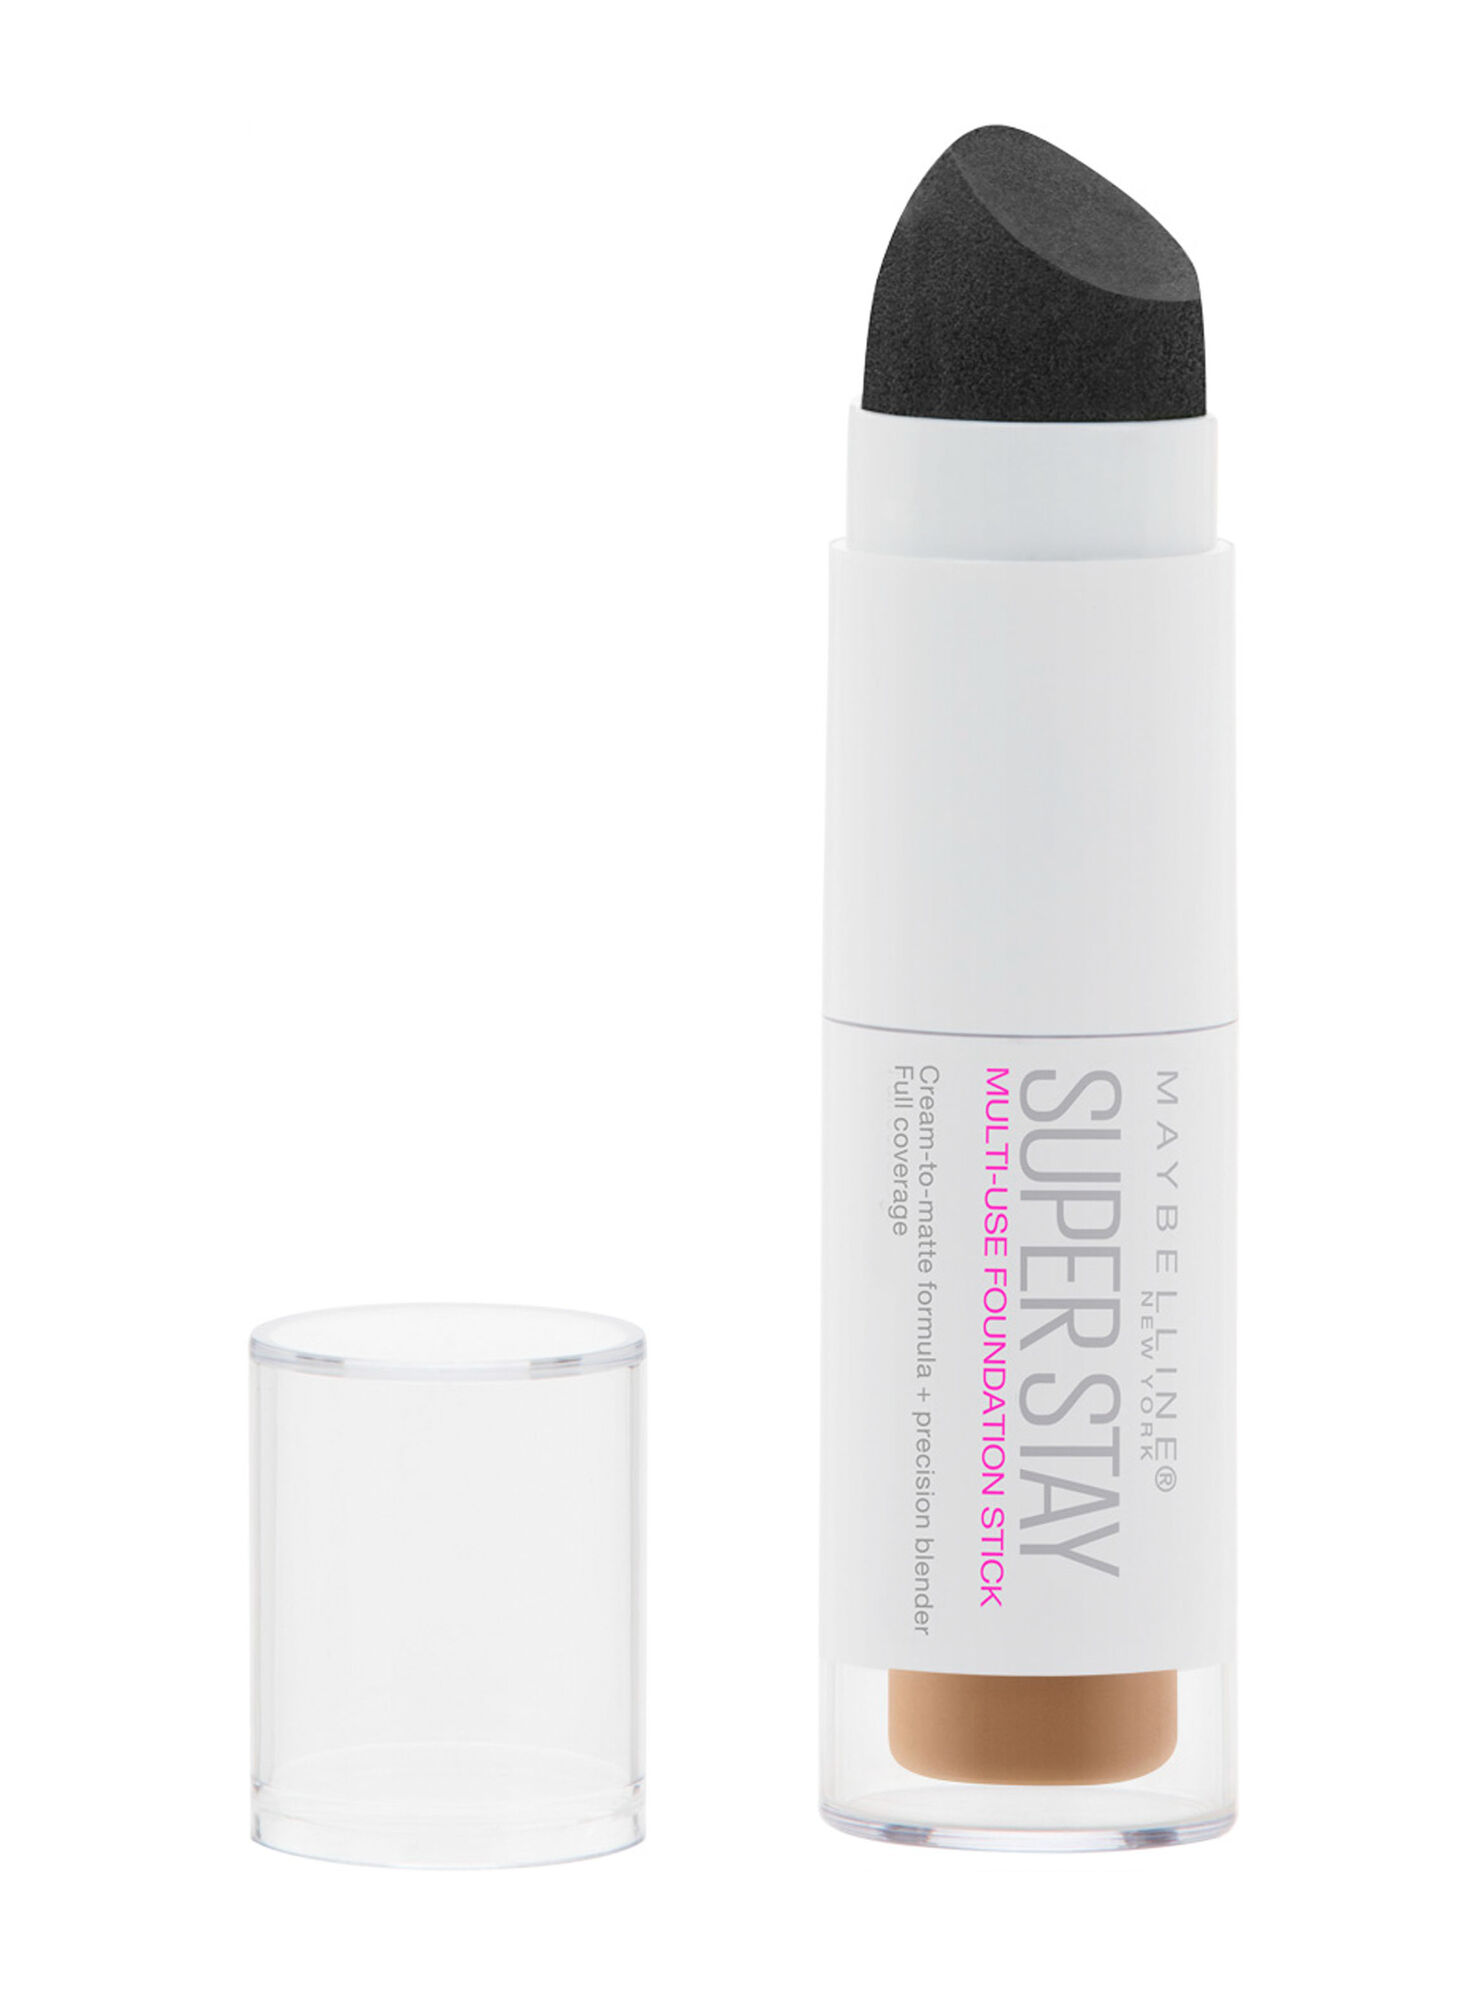 Base Maquillaje Barra Super Stay - MAYBELLINE 330 Toffe...